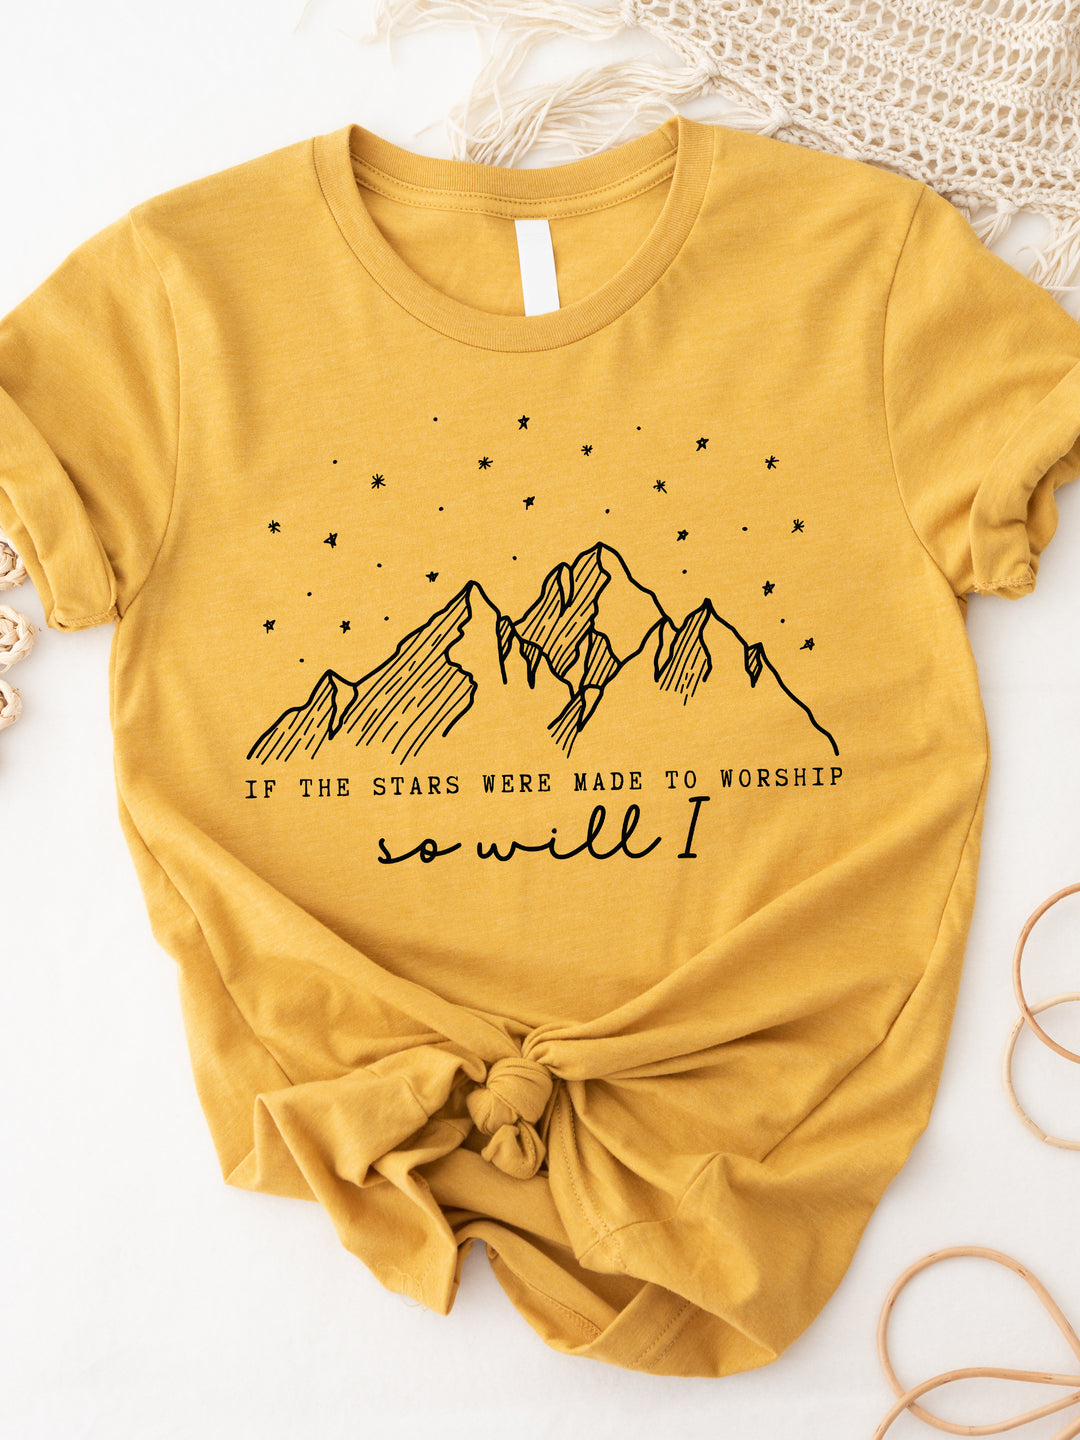 Stars were made to worship so will I Graphic Tee